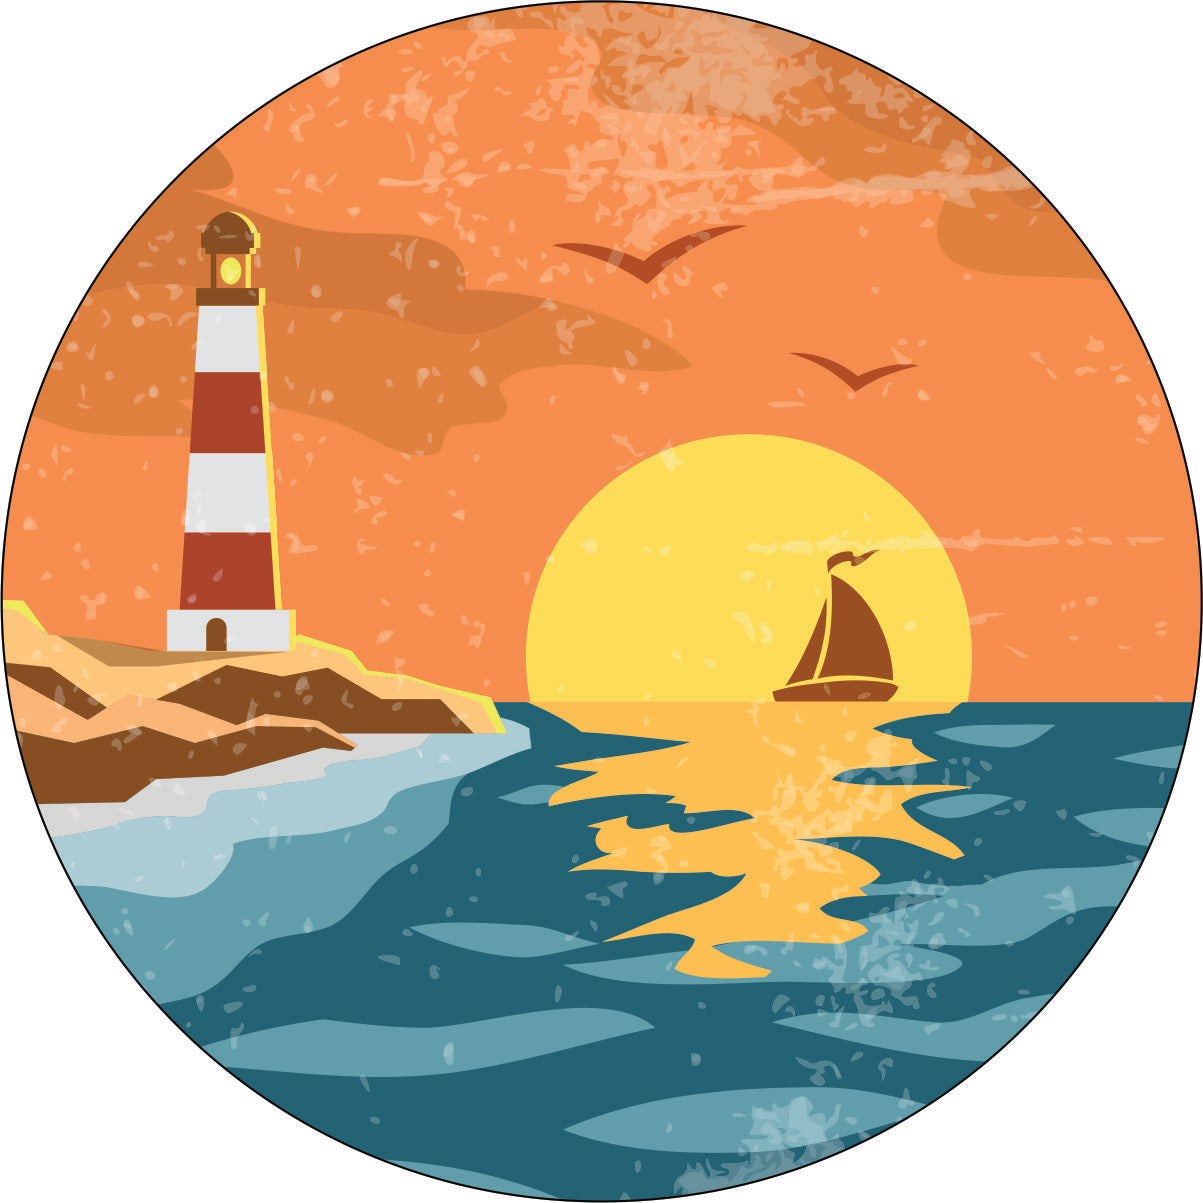 Vintage Lighthouse at the sea Coastal Spare Tire Cover prototype design for Jeep, Bronco, RV, Camper, and more